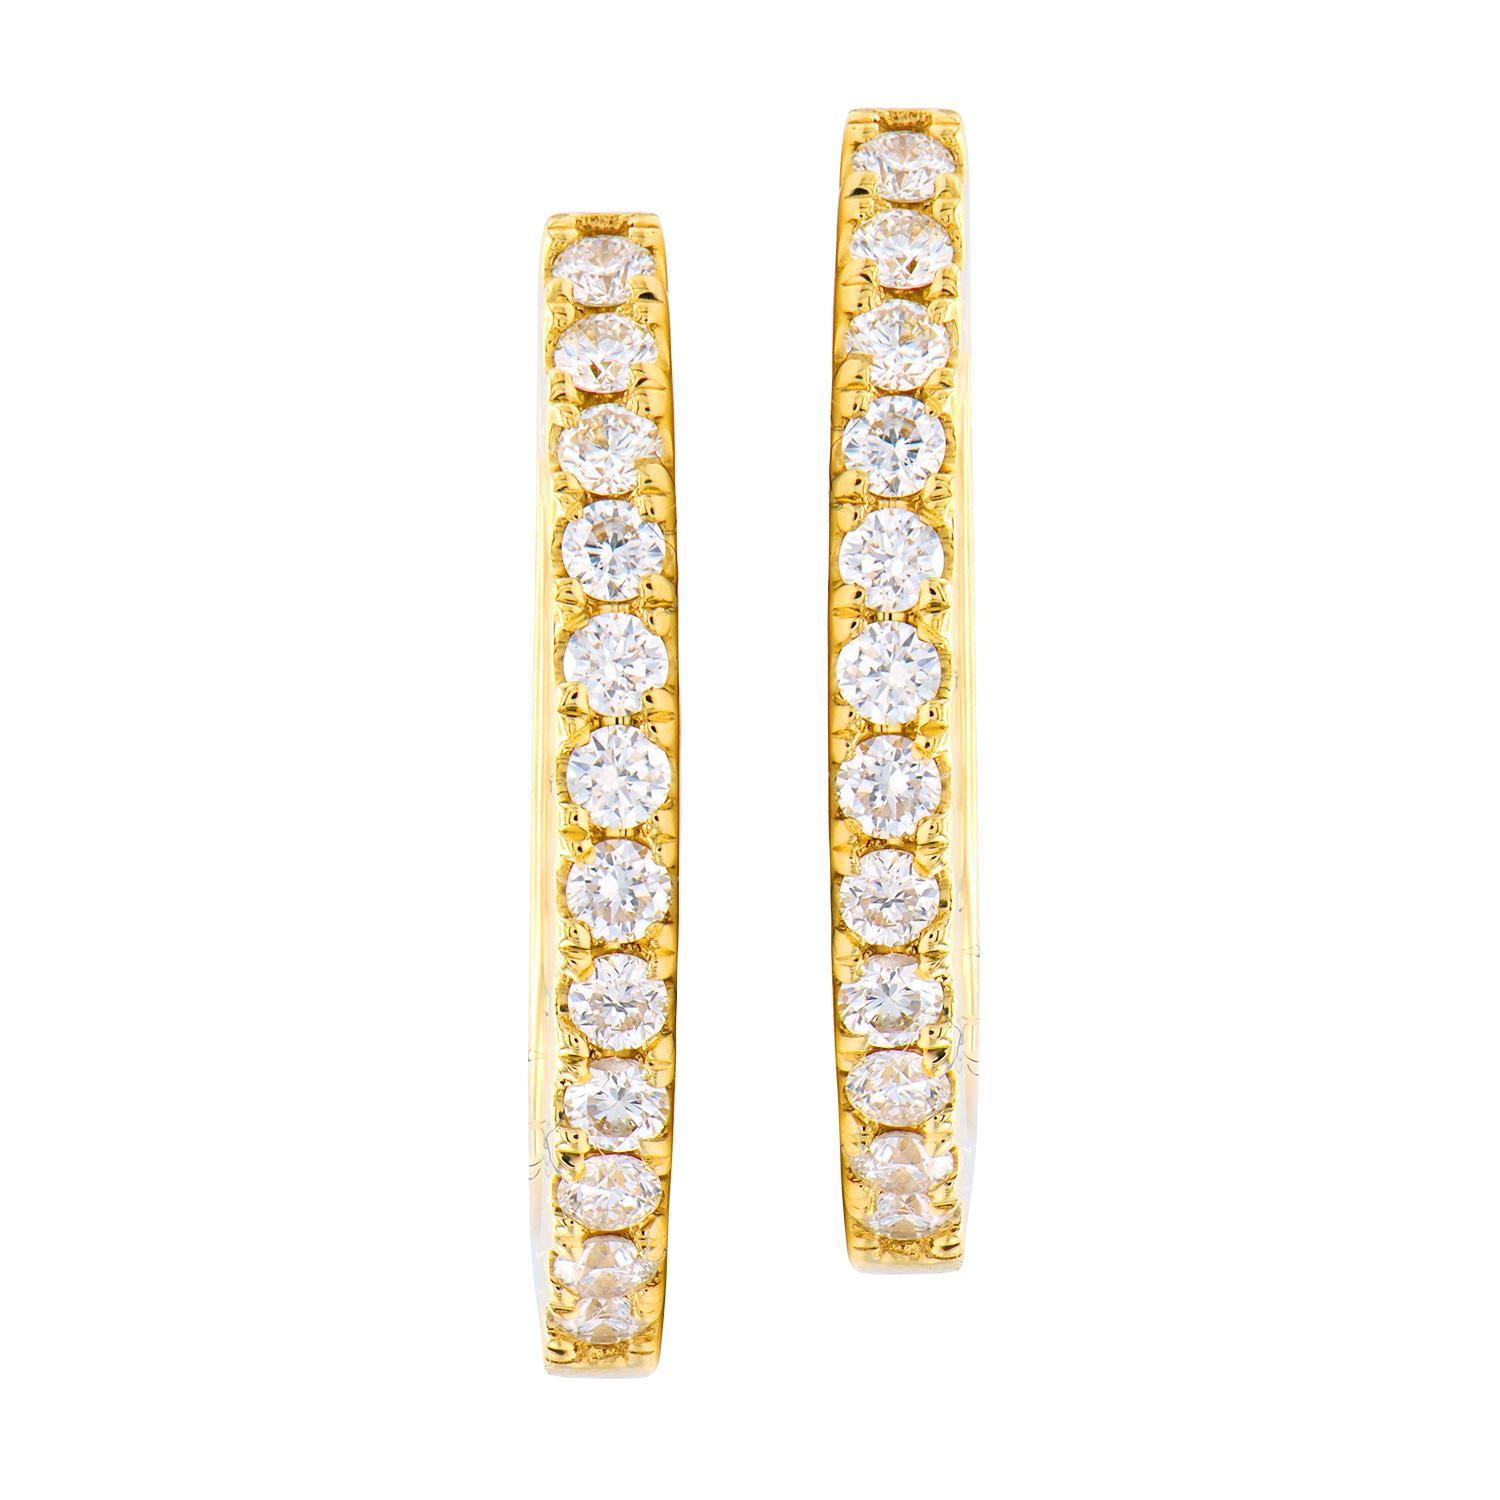 These hoops are classic and timeless. They are made from 2.4 grams of 14-karat yellow gold with a row of diamonds on the front side. The 24 diamonds are SI1-SI2, GH color, and a total of 0..26 carats. They are secured through the ear with a post